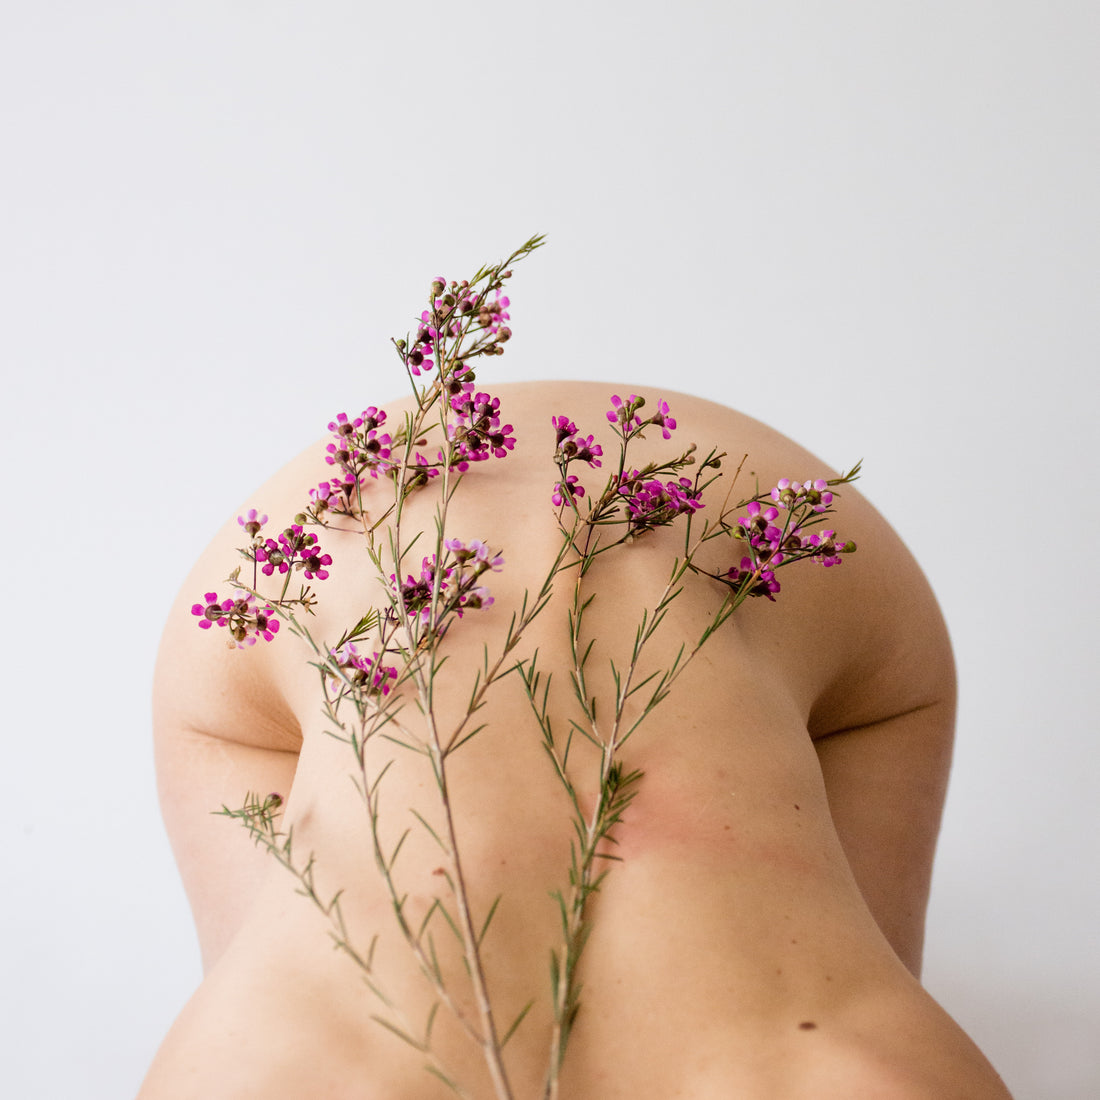 Entropy, Earth Day & EPA Rollbacks - Back of Nude Model Covered in Pink Flowers